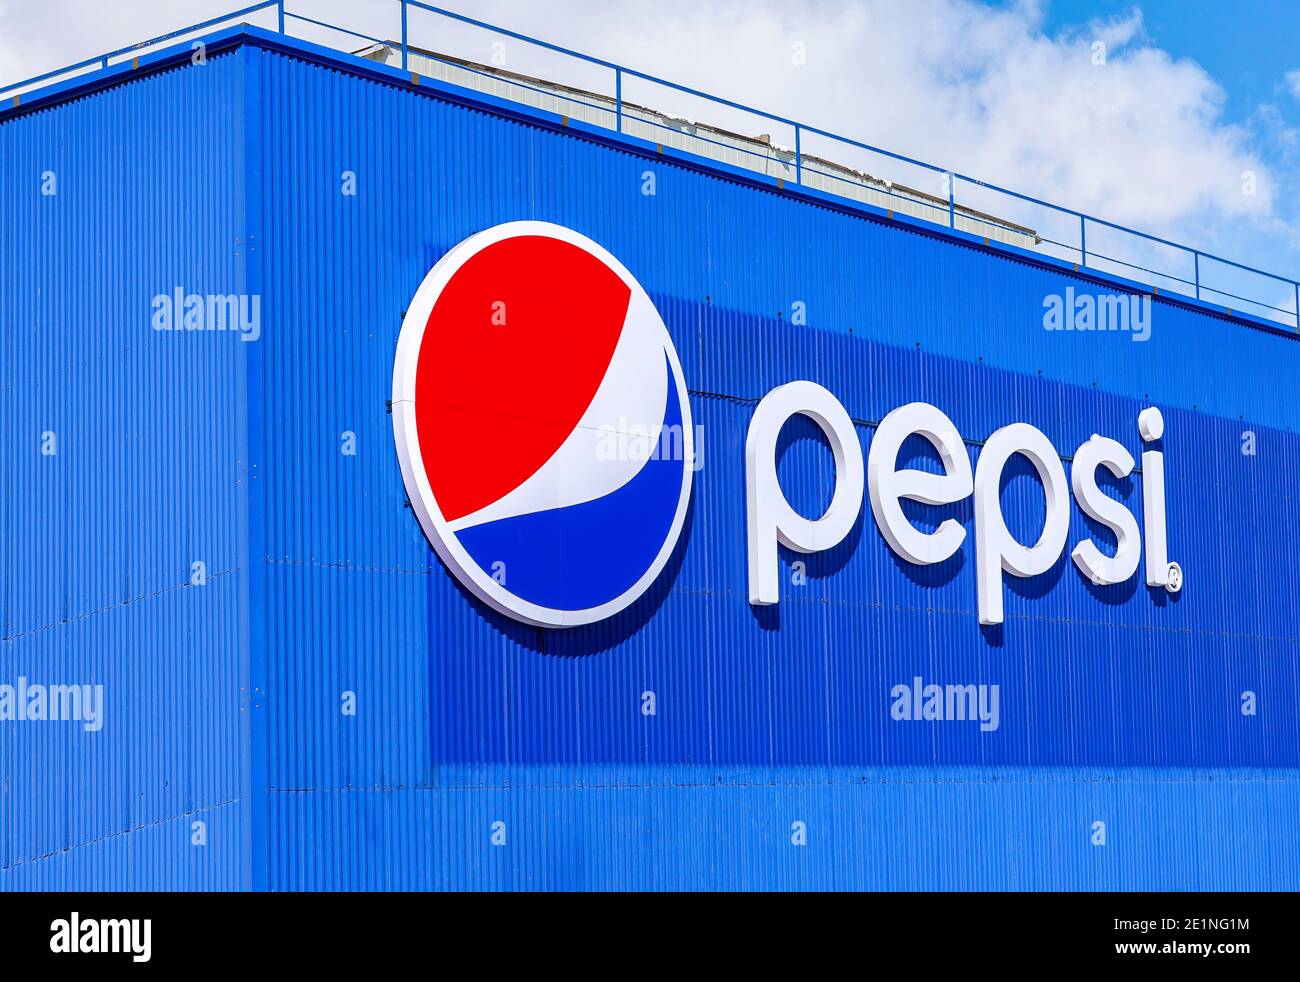 Samara, Russia - March 20, 2016: Brand name of Pepsi Corporation on the wall of factory. PepsiCo Inc. is an American multinational food, snack and bev Stock Photo